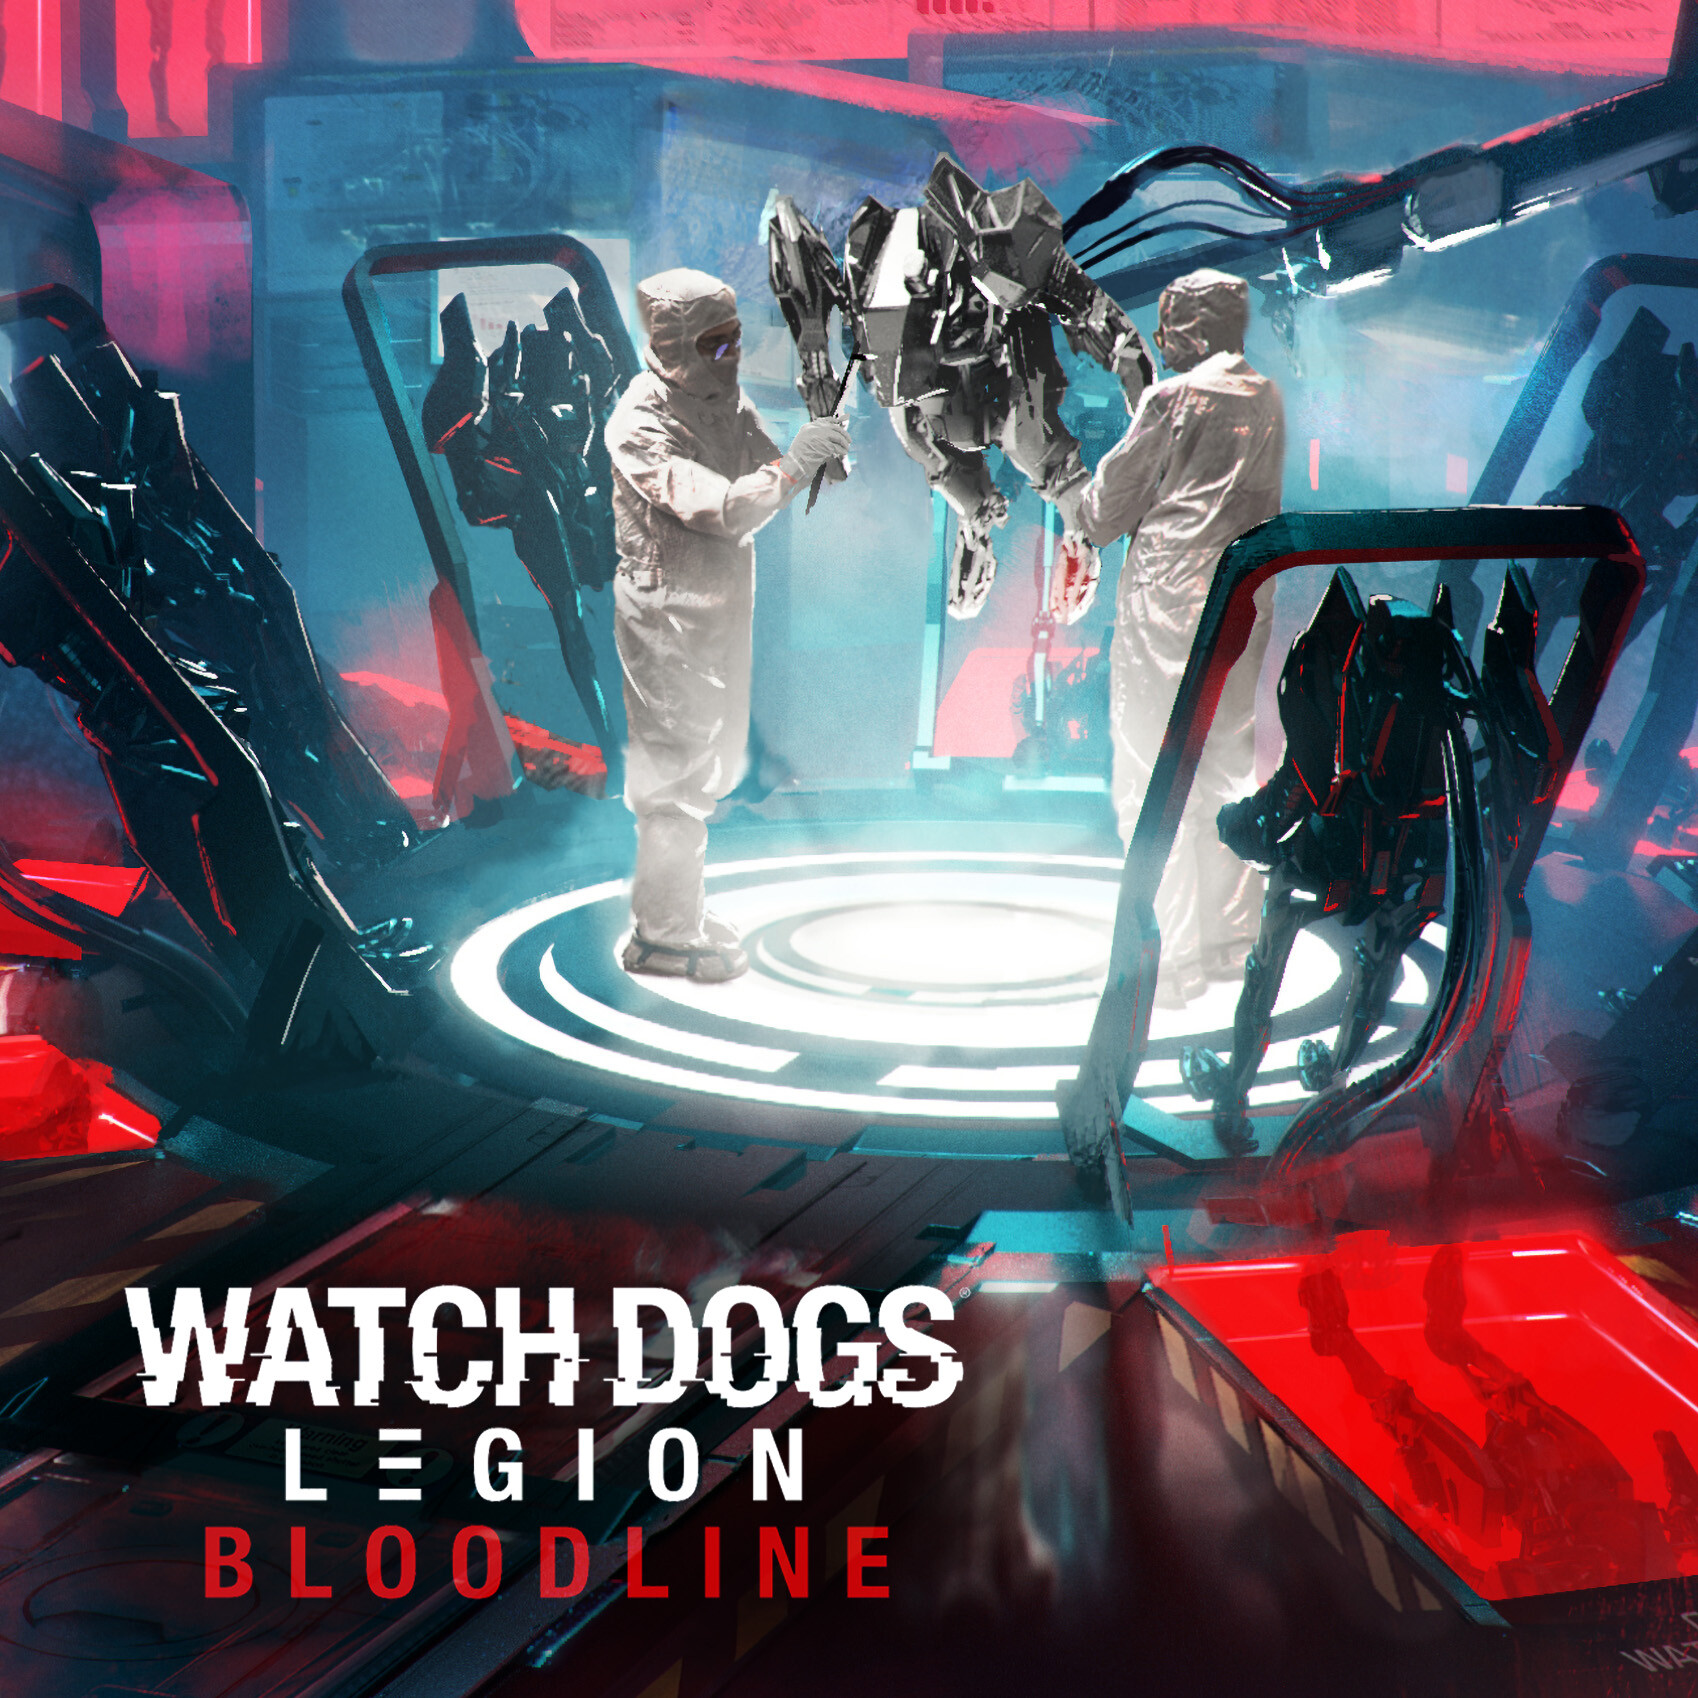 Watch Dogs Legion Bloodline Game Poster – My Hot Posters